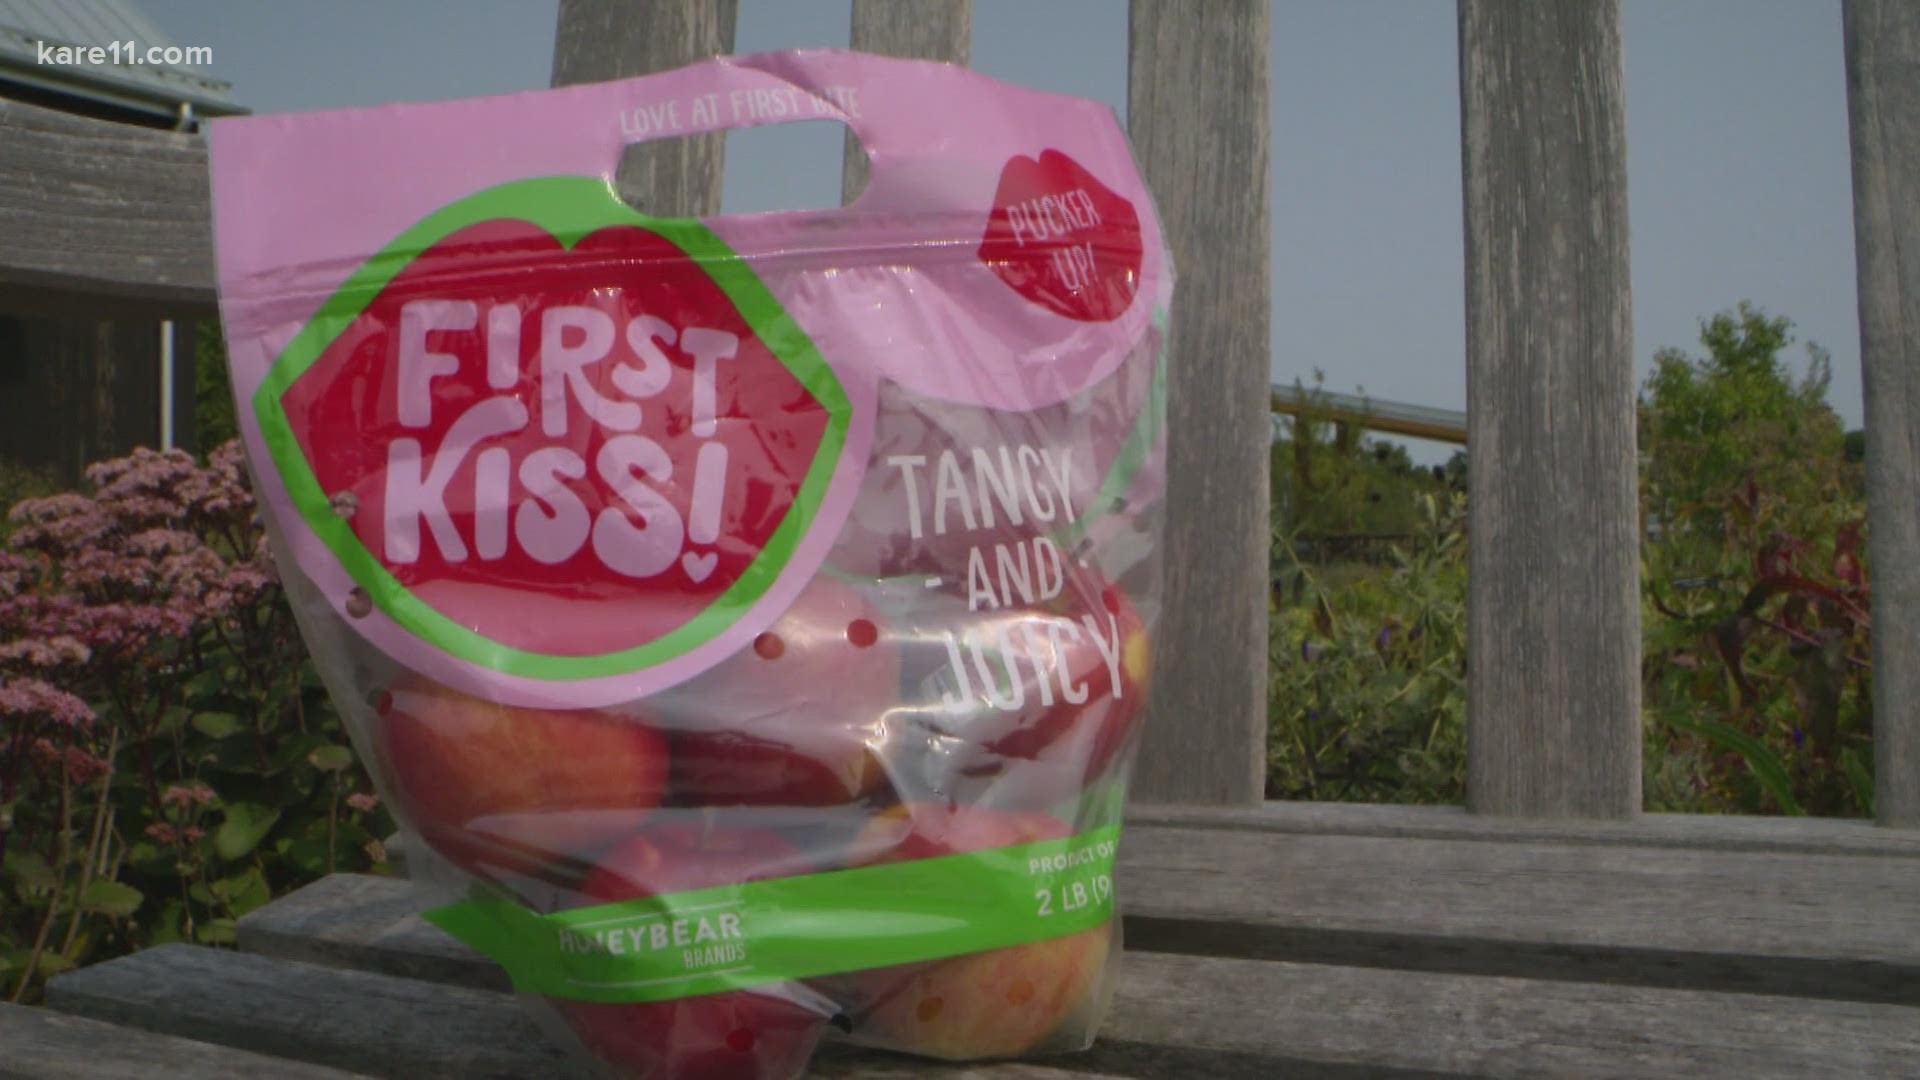 As the First Kiss apples hit shelves for the season, Honeybear Brands and Cub foods have partnered to fund pollinator habitats from all of its local apple sales.